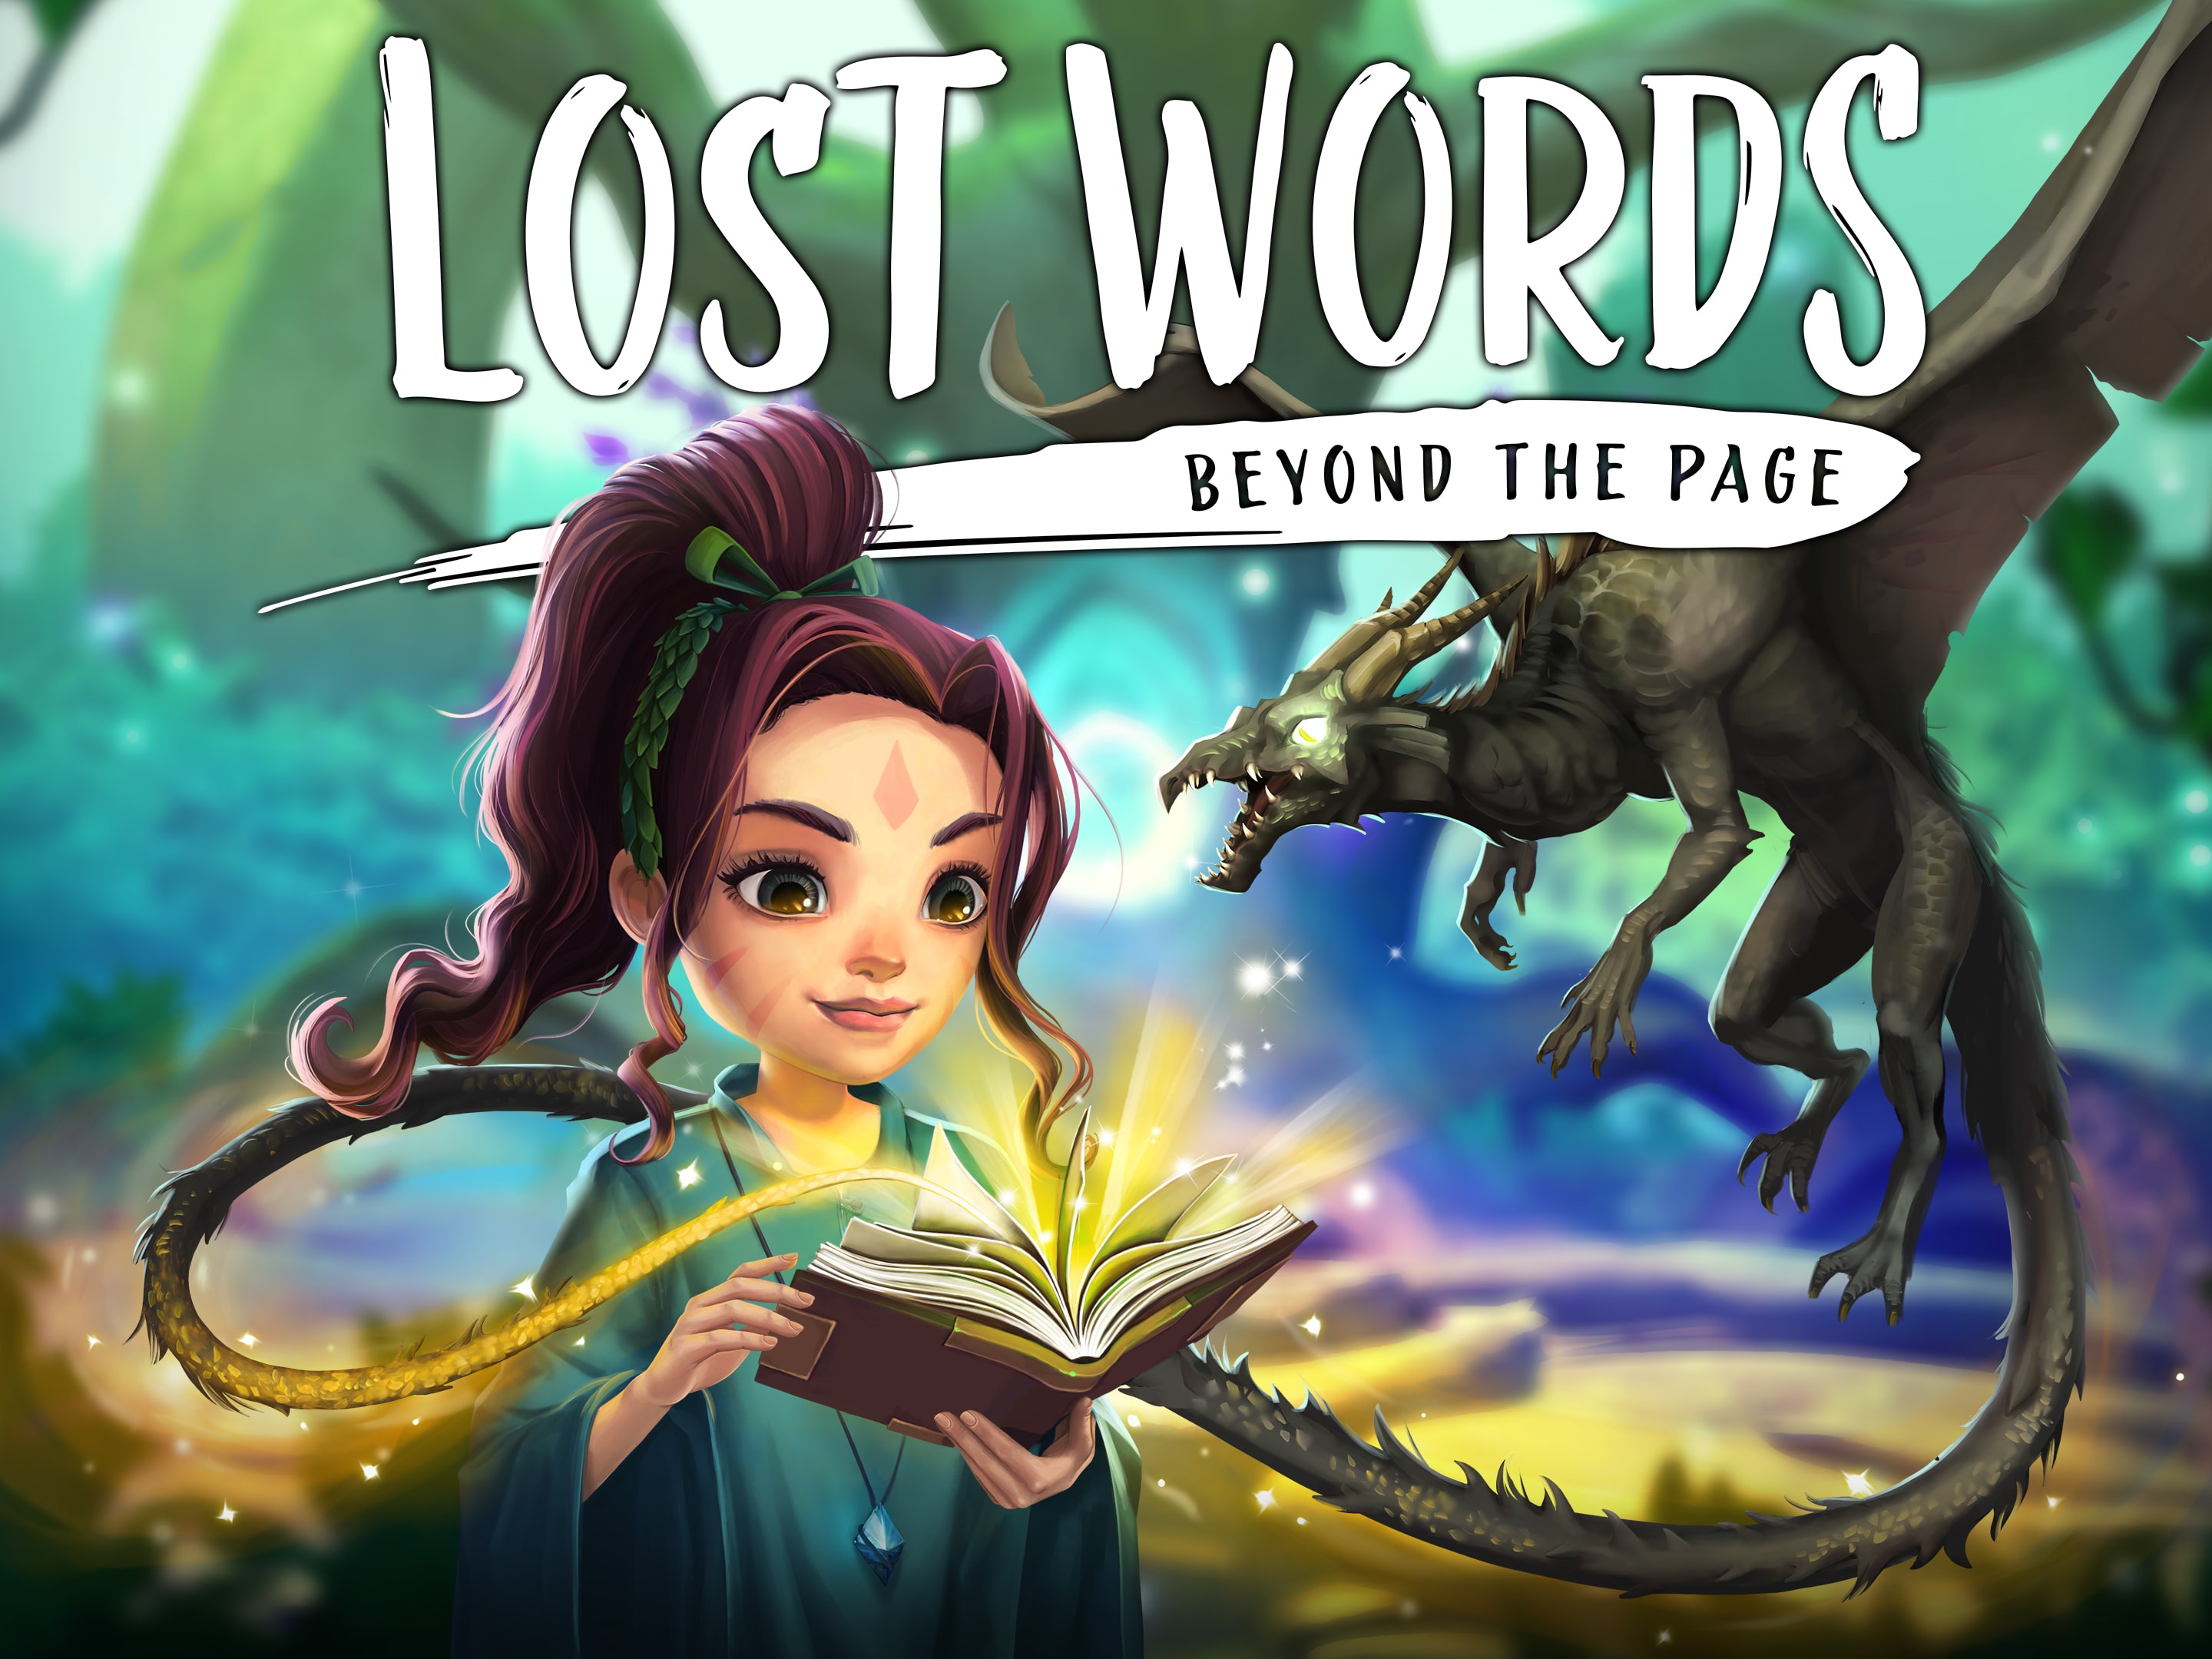 Lose your word. Lost Words: Beyond the Page. Lost Worlds Beyond the Page. Page игра. Beyond the Beyond.